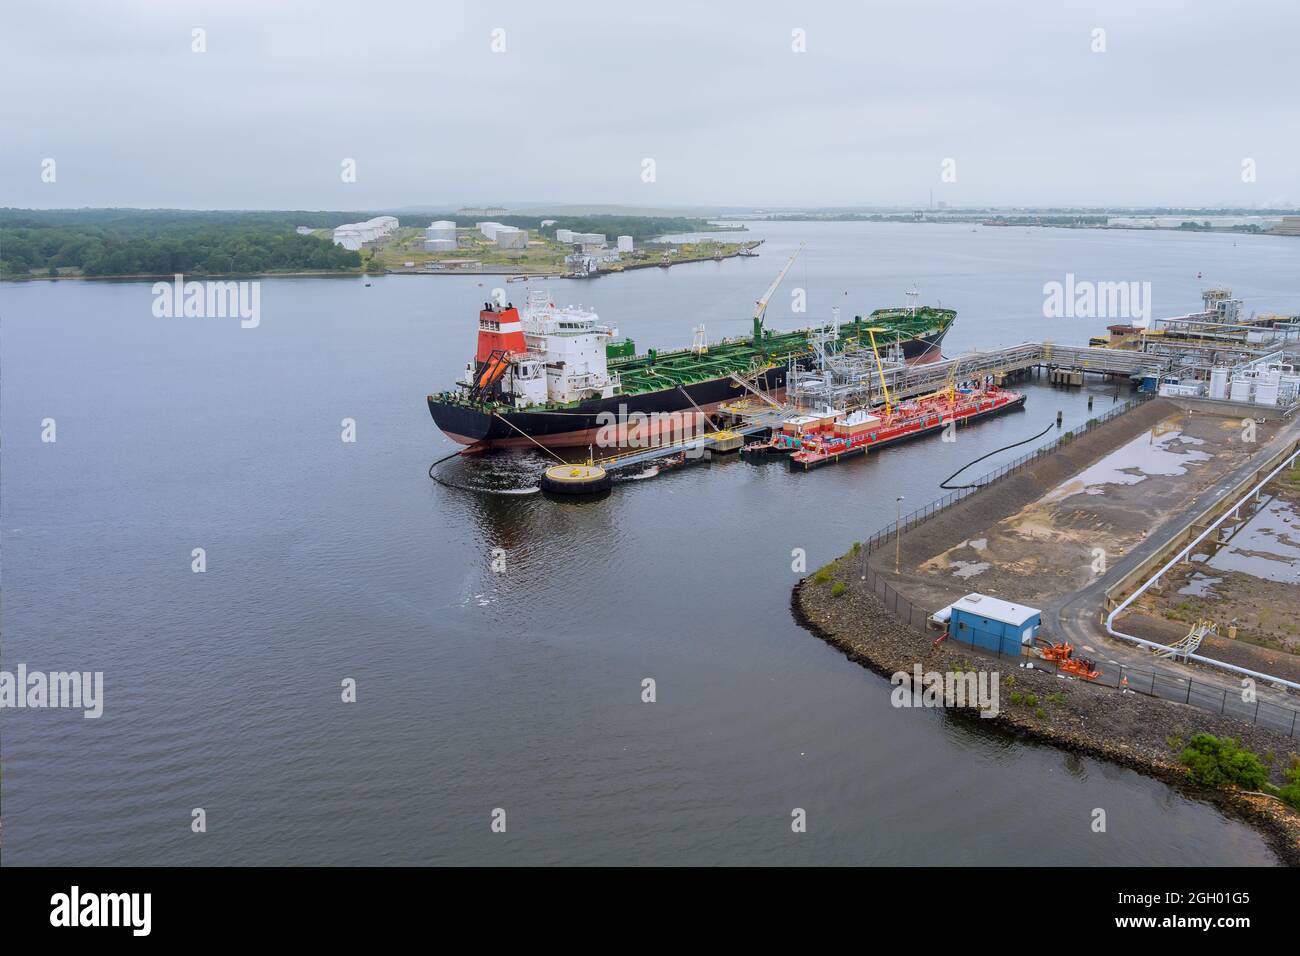 Aerial view of oil tanker ship moored at a oil storage terminal Stock Photo